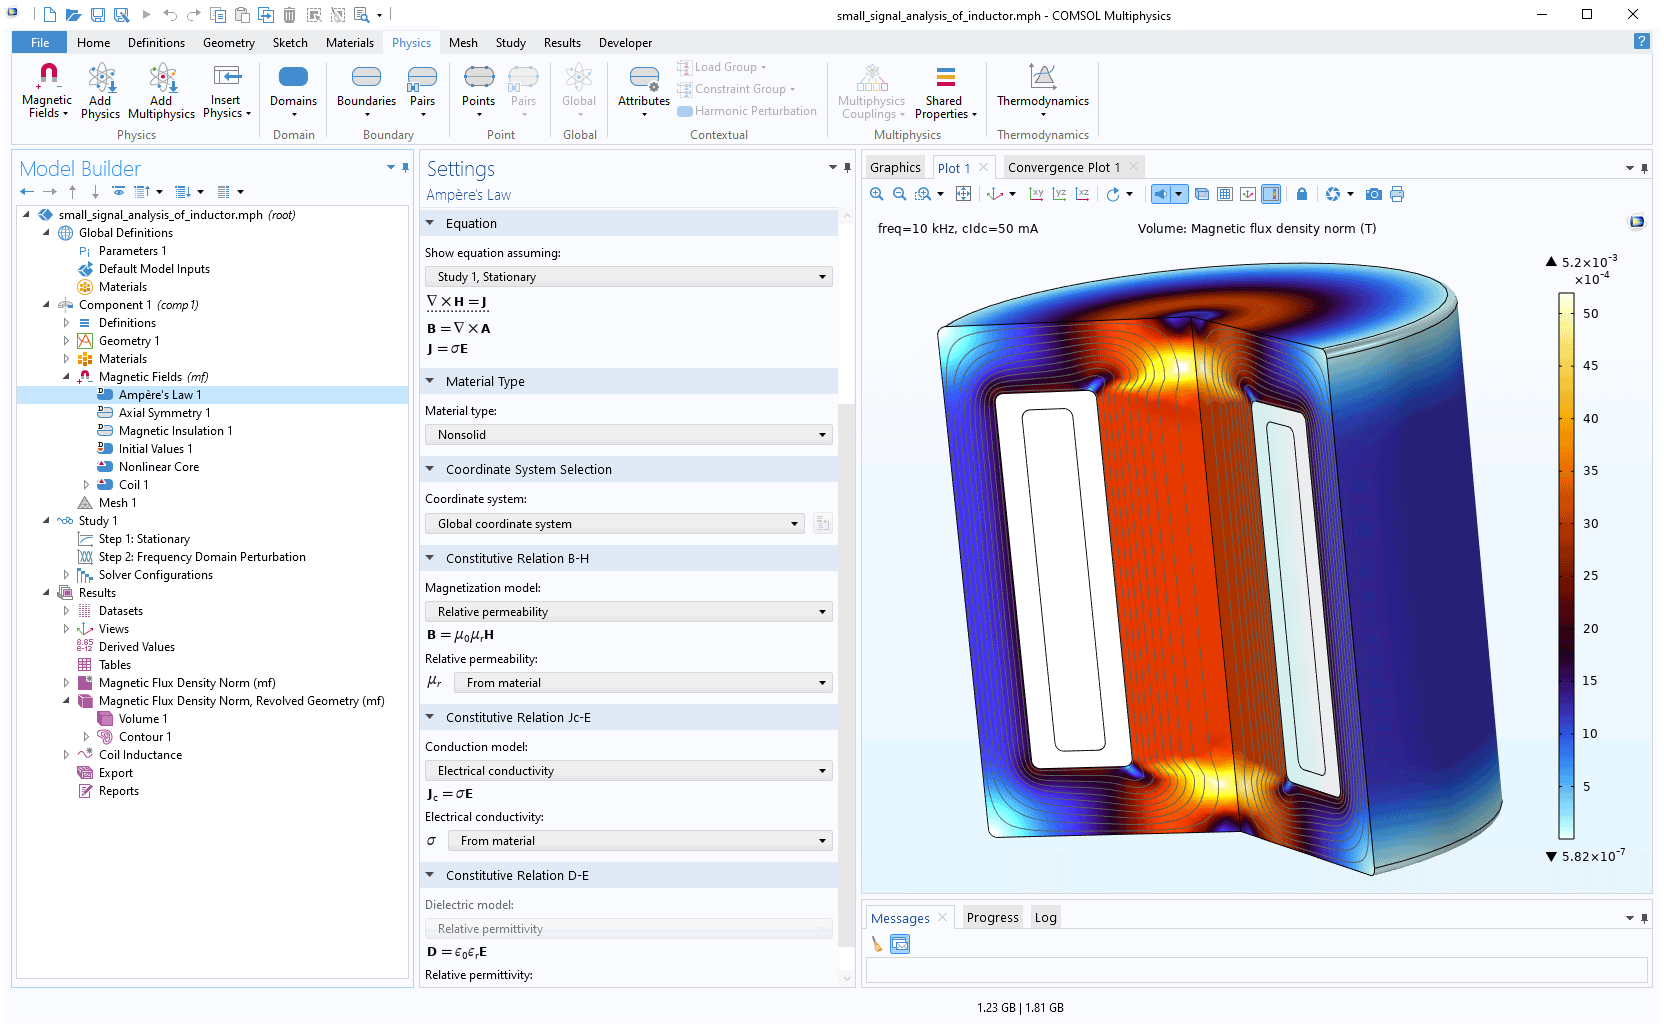 The COMSOL Multiphysics UI showing the Model Builder with the Ampere's Law node highlighted, the corresponding Settings window, and an inductor model in the Graphics window.